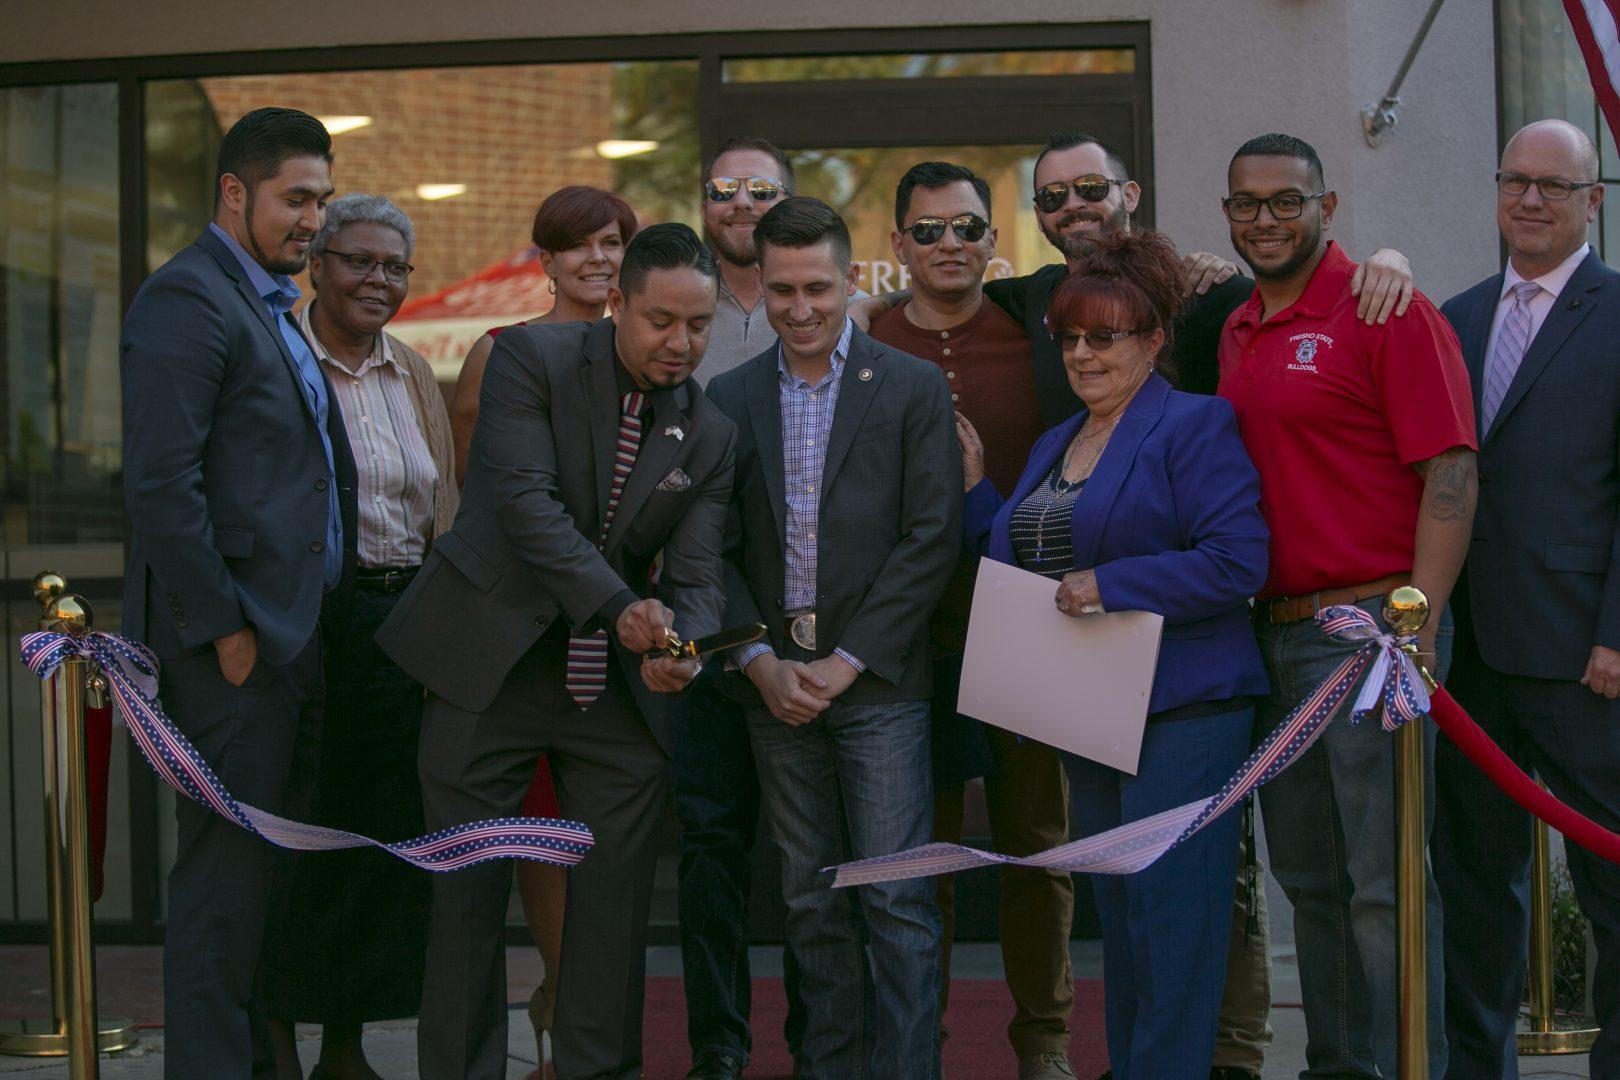 Faculty, staff and veteran students cut the ribbon during the grand opening of the Veterans Resource Center, located at the University Center room 101 on Friday, Nov. 15, 2019. (Anthony De Leon/ The Collegian)